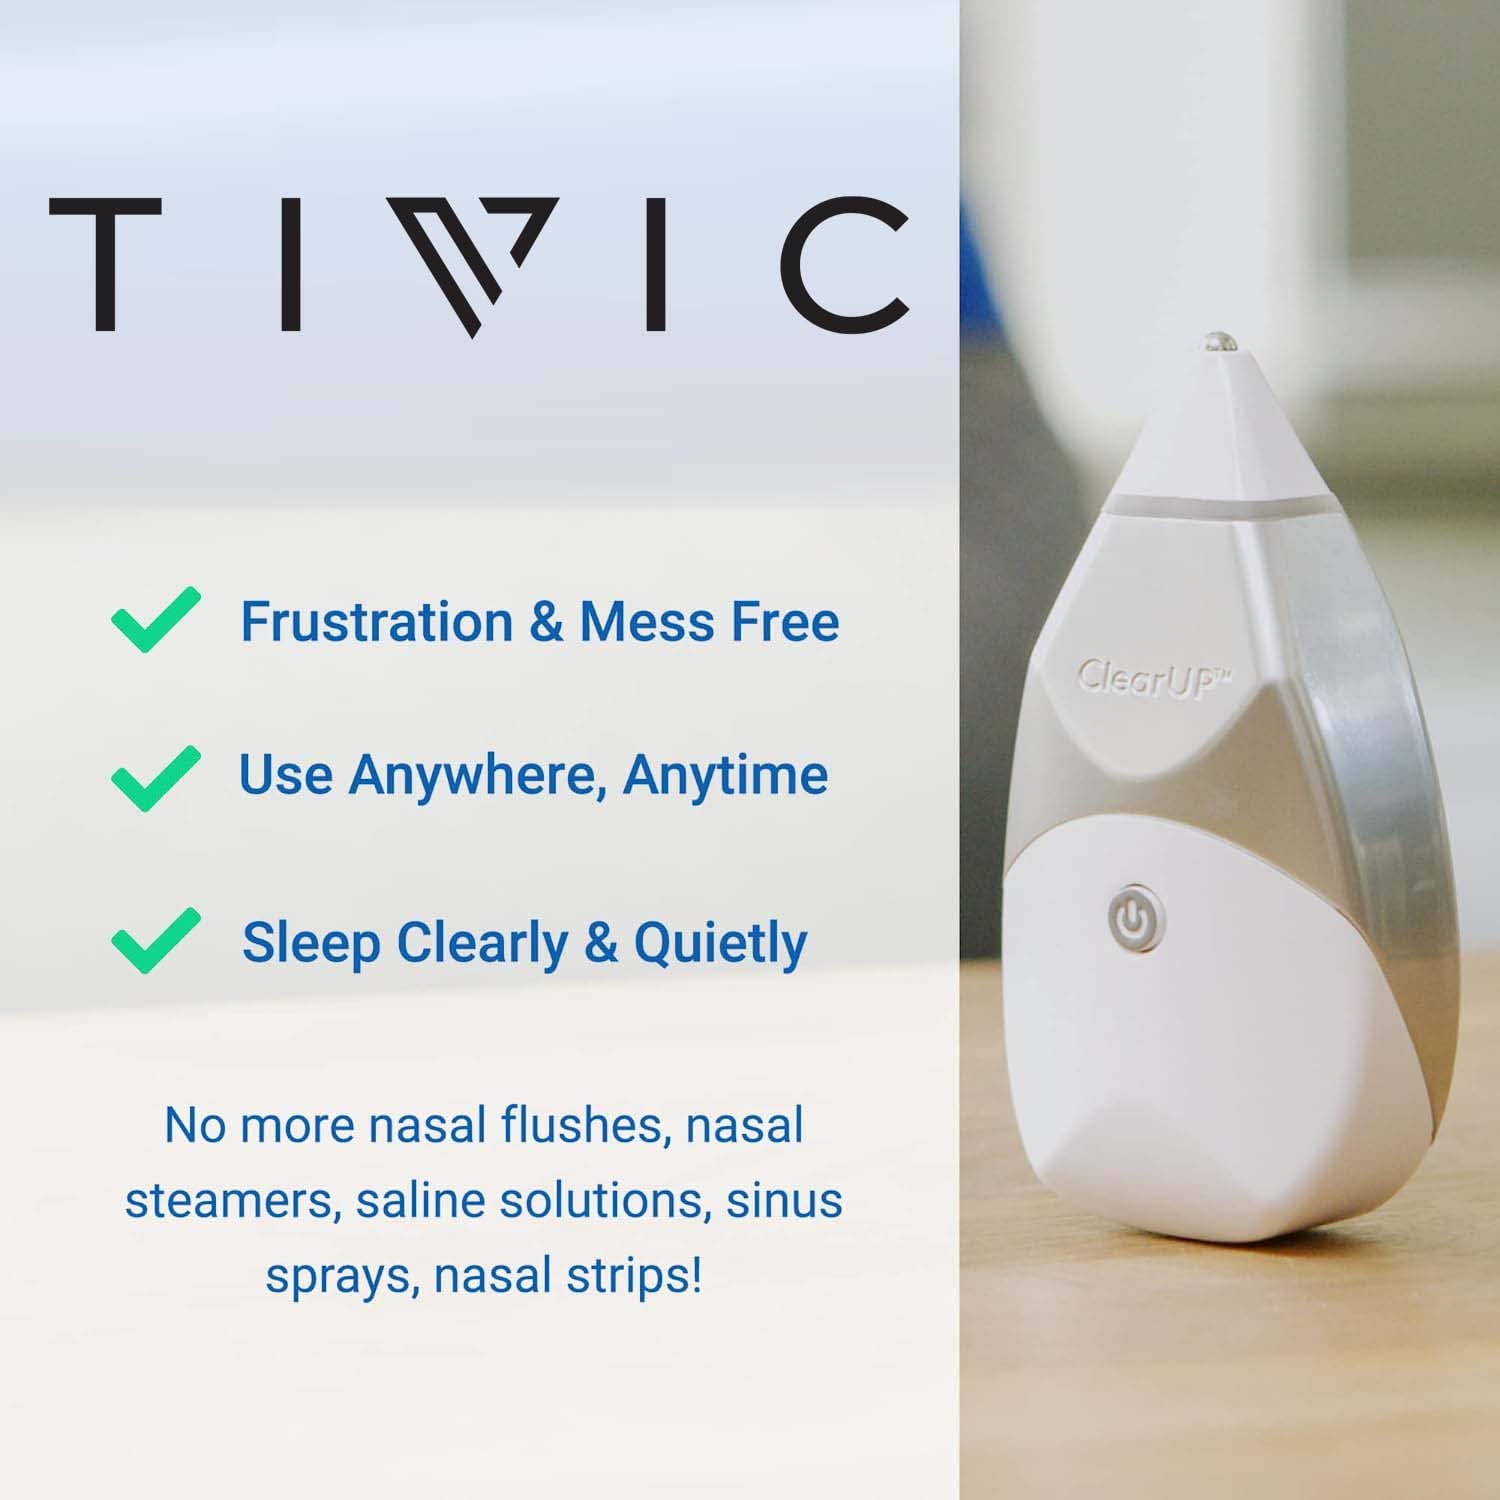 Tivic ClearUP - Sinus Pain, Congestion, and Nasal Relief - Bioelectronic Device for Symptoms Caused by Allergy Cold & Flu - Medication Free Solution, Non Drowsy, FSA HSA Eligible